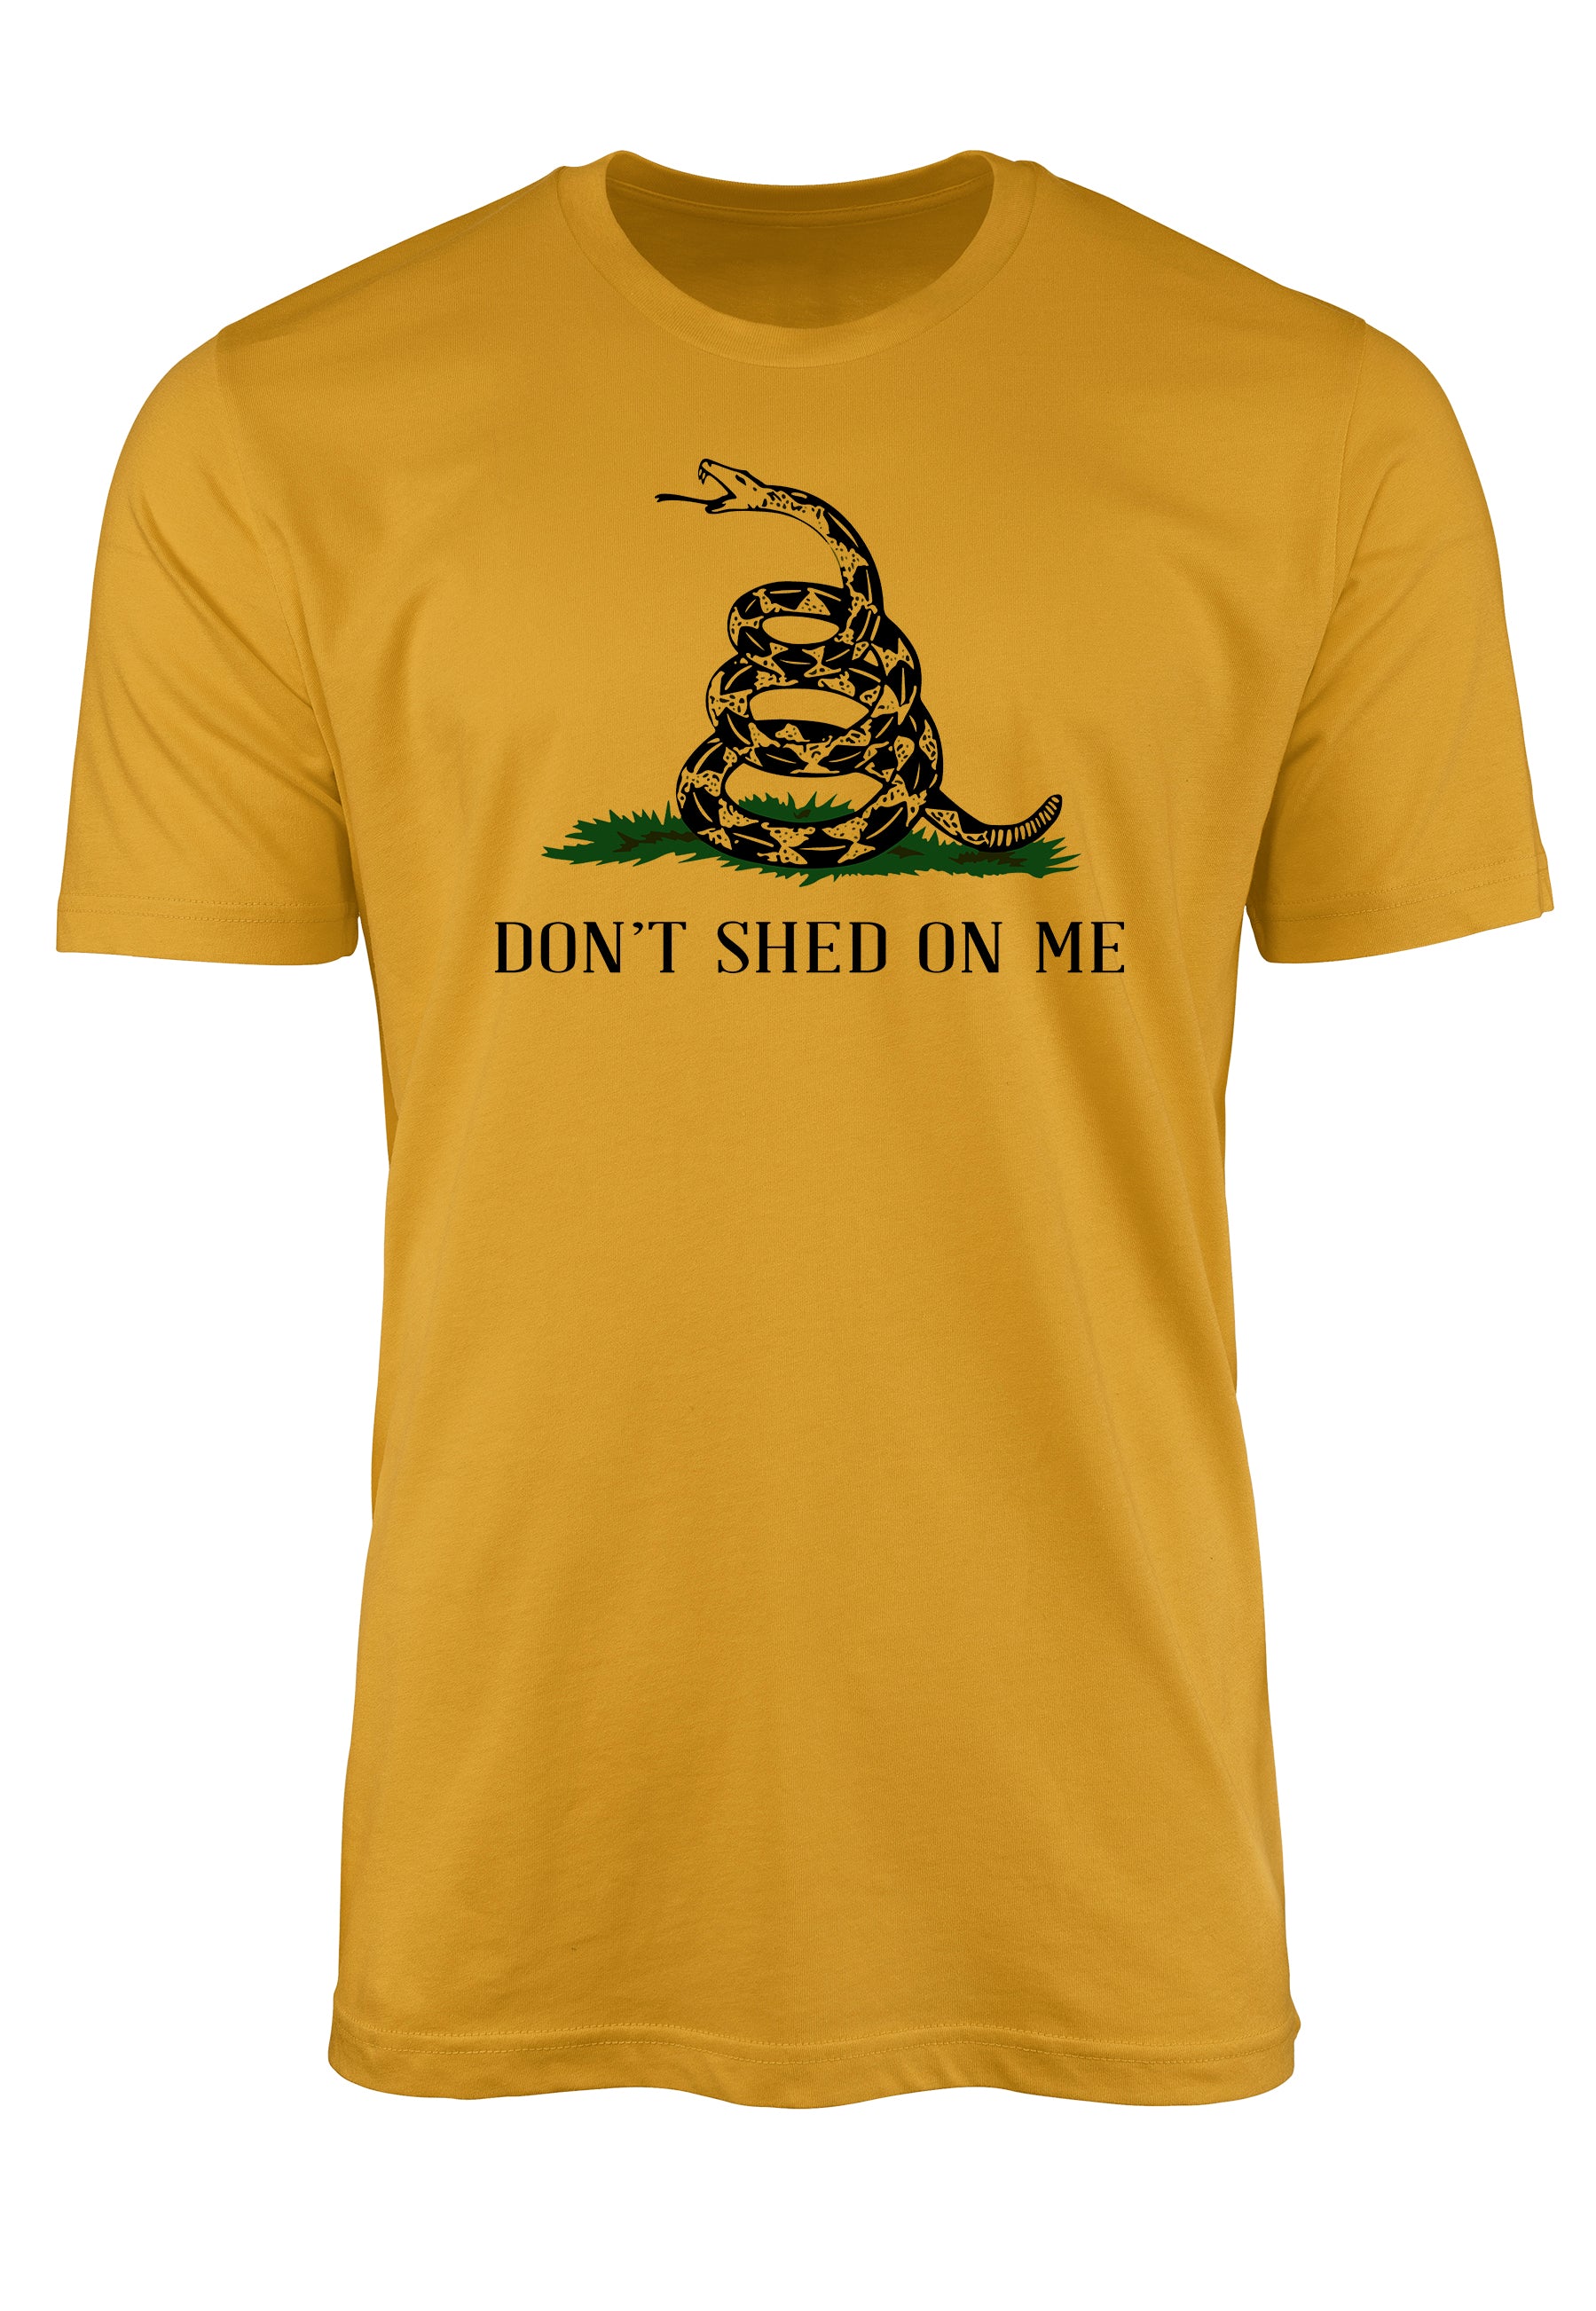 Don't Shed on Me t-shirt